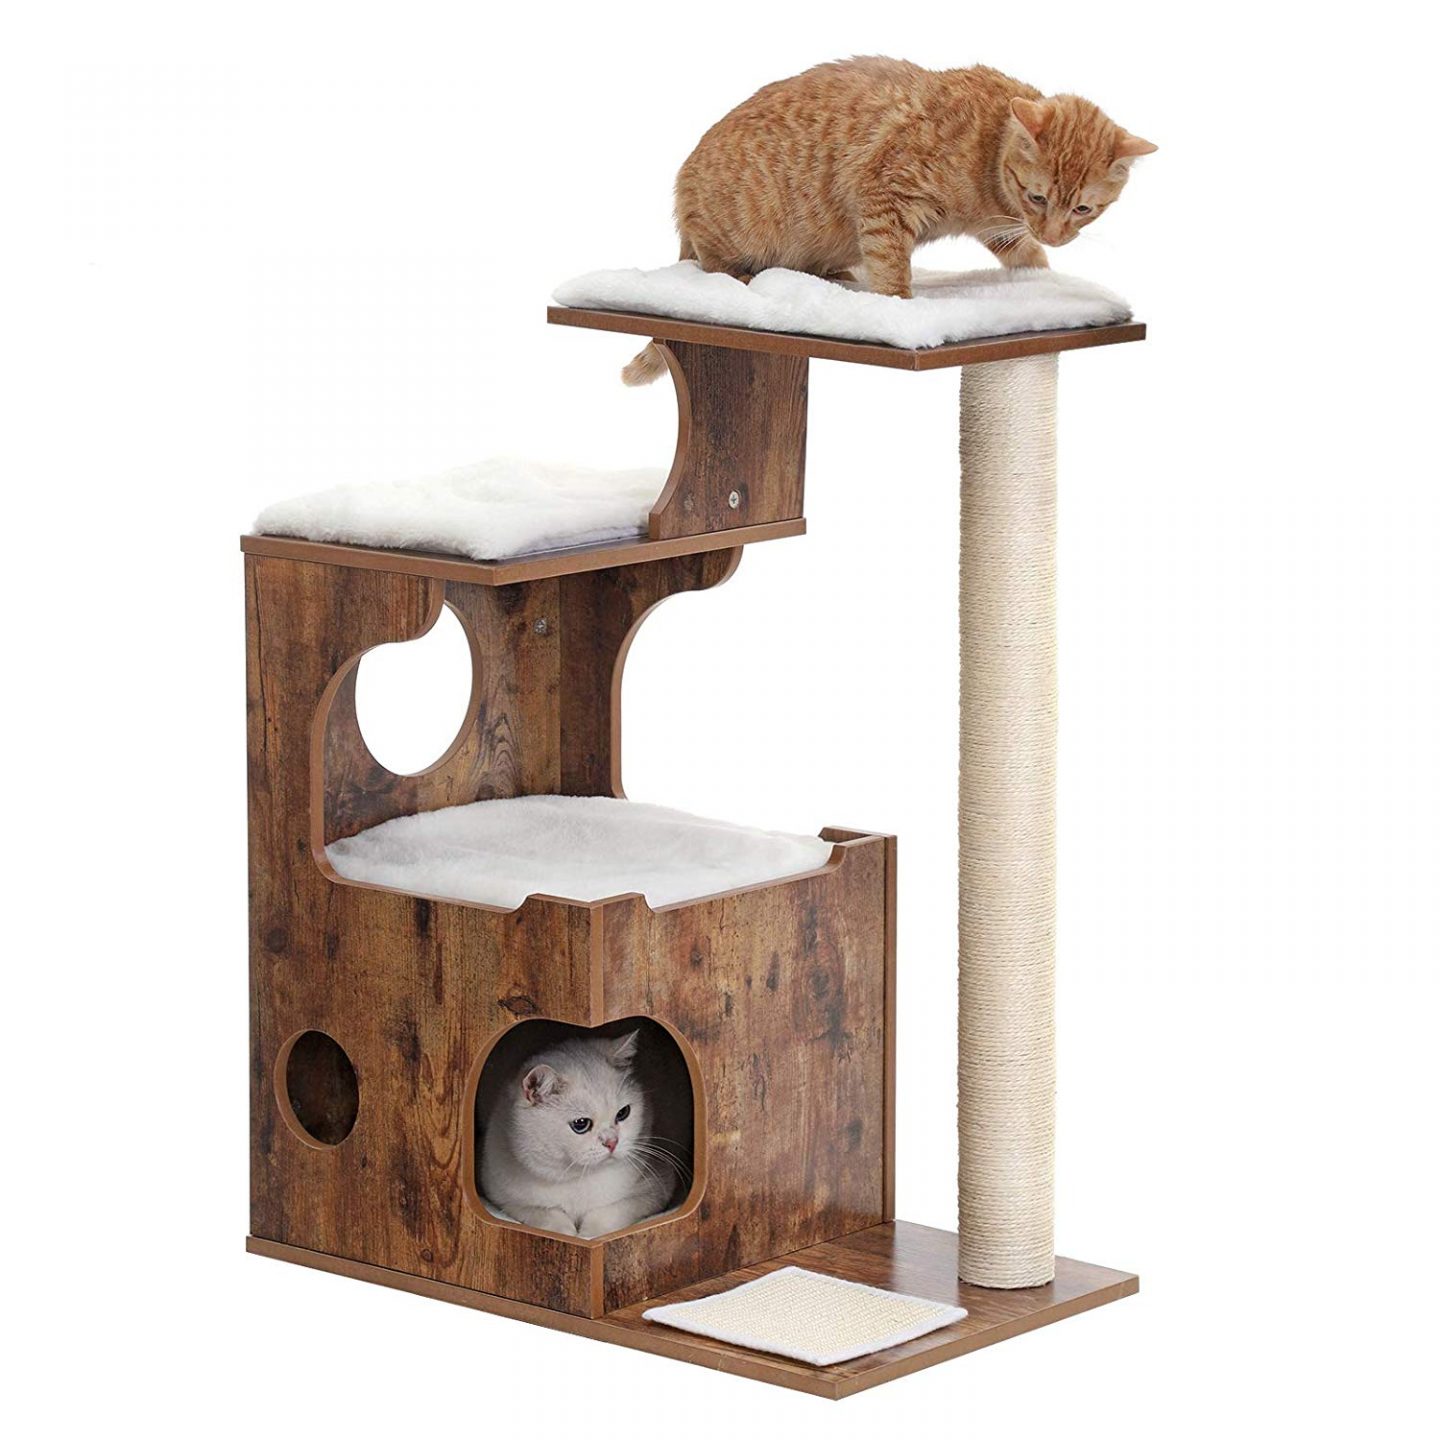 A modern rustic inspired cat tree that is perfect for senior cats who need just a little more love and easier ways to get up high like they used to.